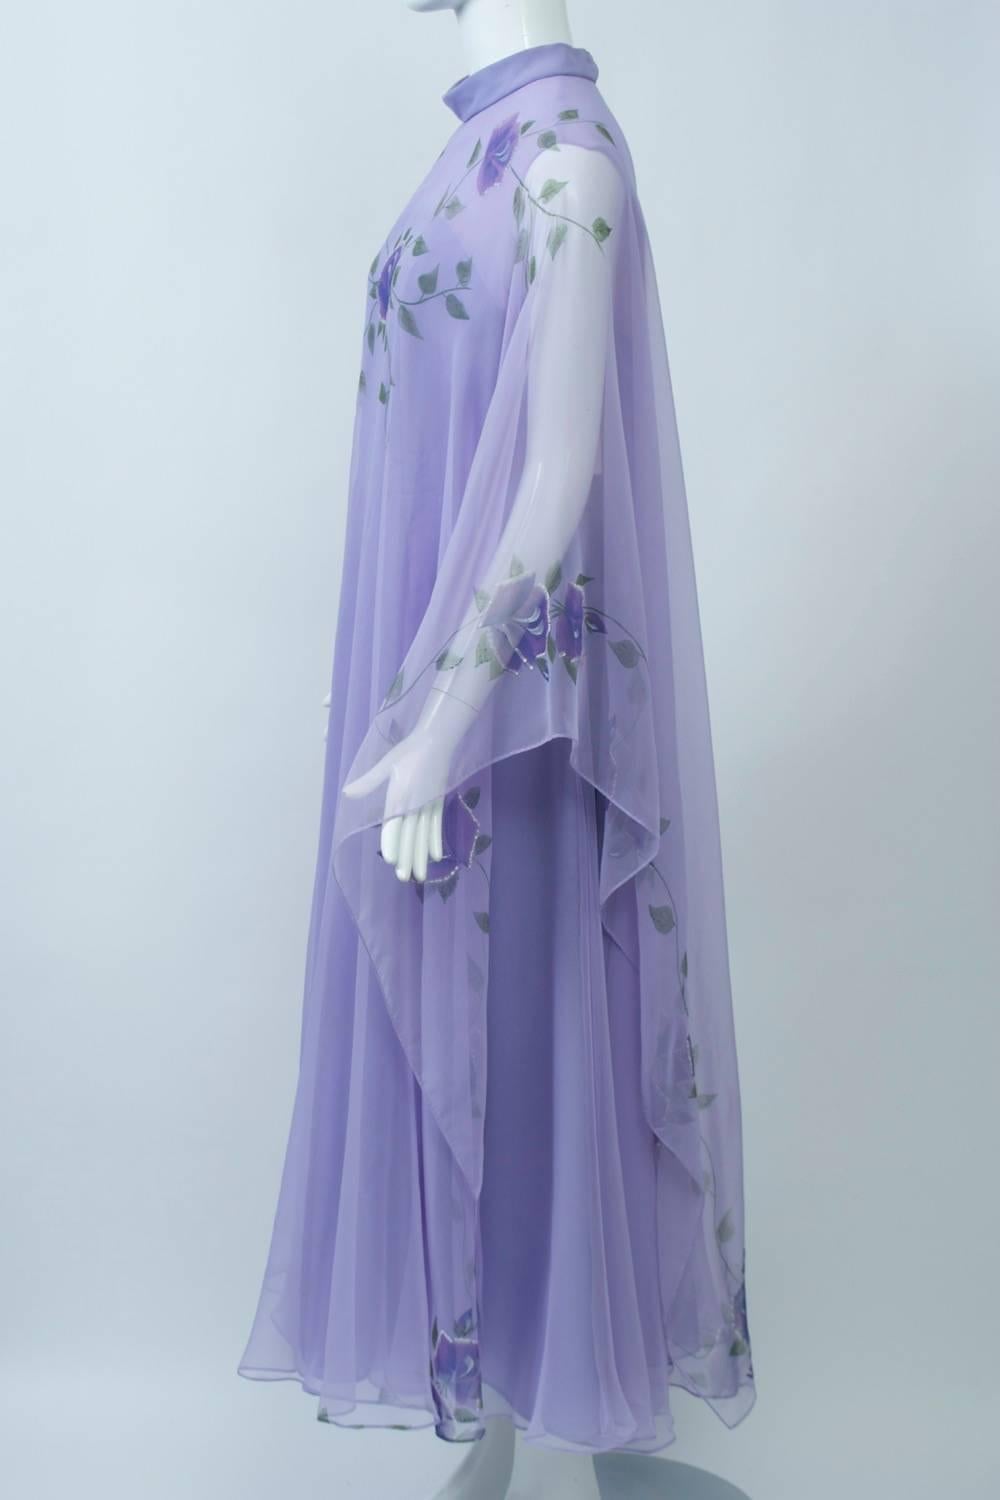 Flowing lavender gown with handpainted floral detail on the outer, turtleneck caftan layer, which is made of sheer synthetic chiffon. Underneath is a fitted, strapless sheath under a matching sheer layer featuring a gored skirt. Back zipper. M-L.